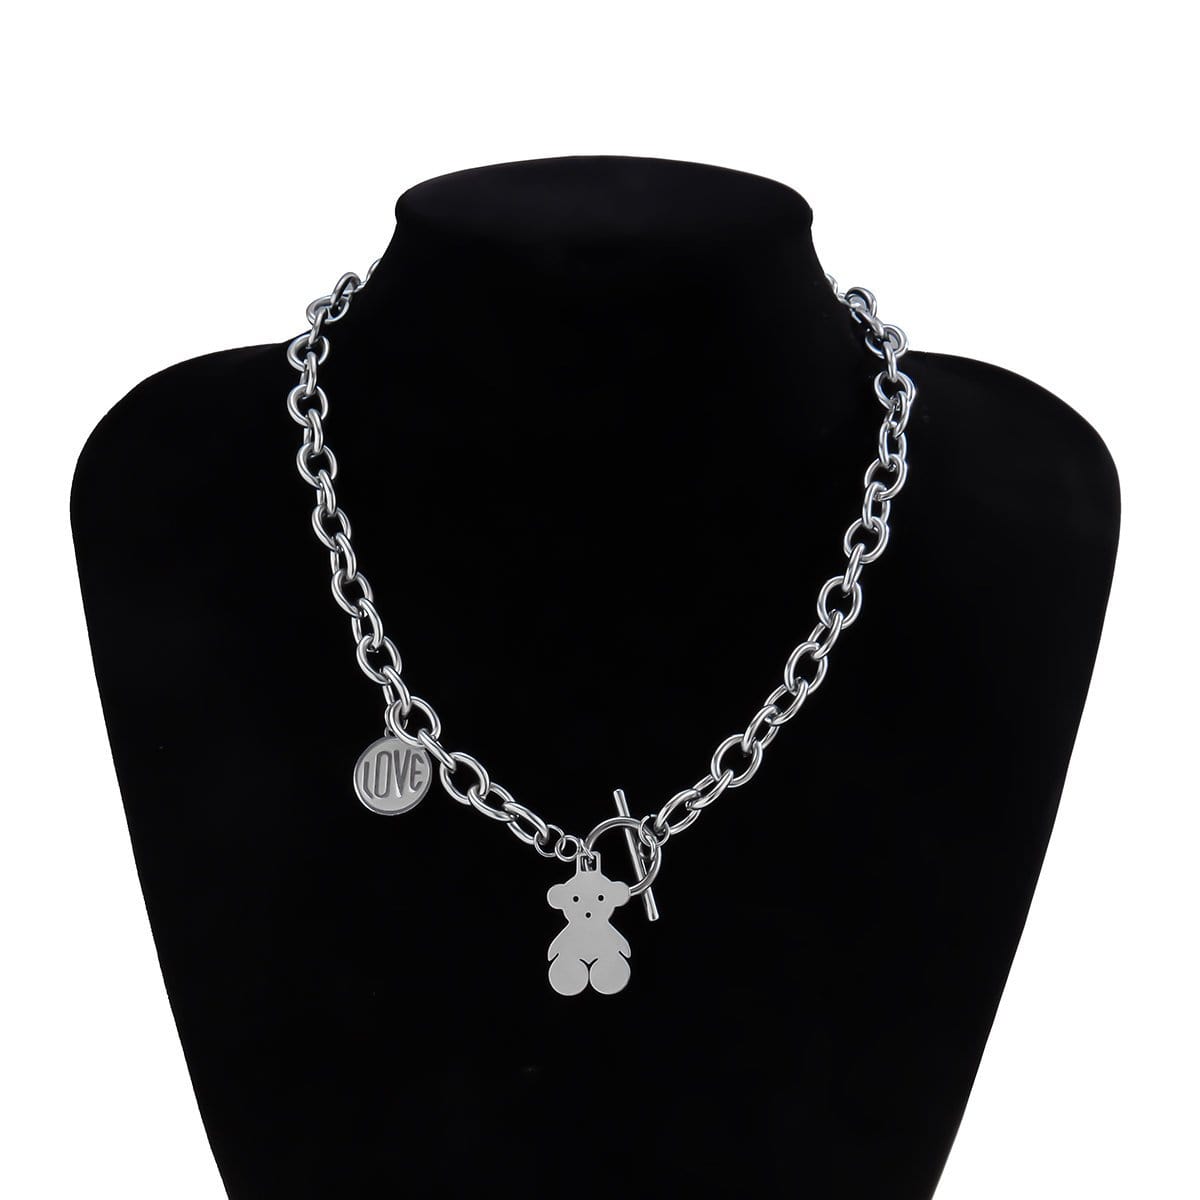 Stainless Steel Hip Hop Toggle Clasp Bear Charm Curb Link Chain Necklace - ArtGalleryZen